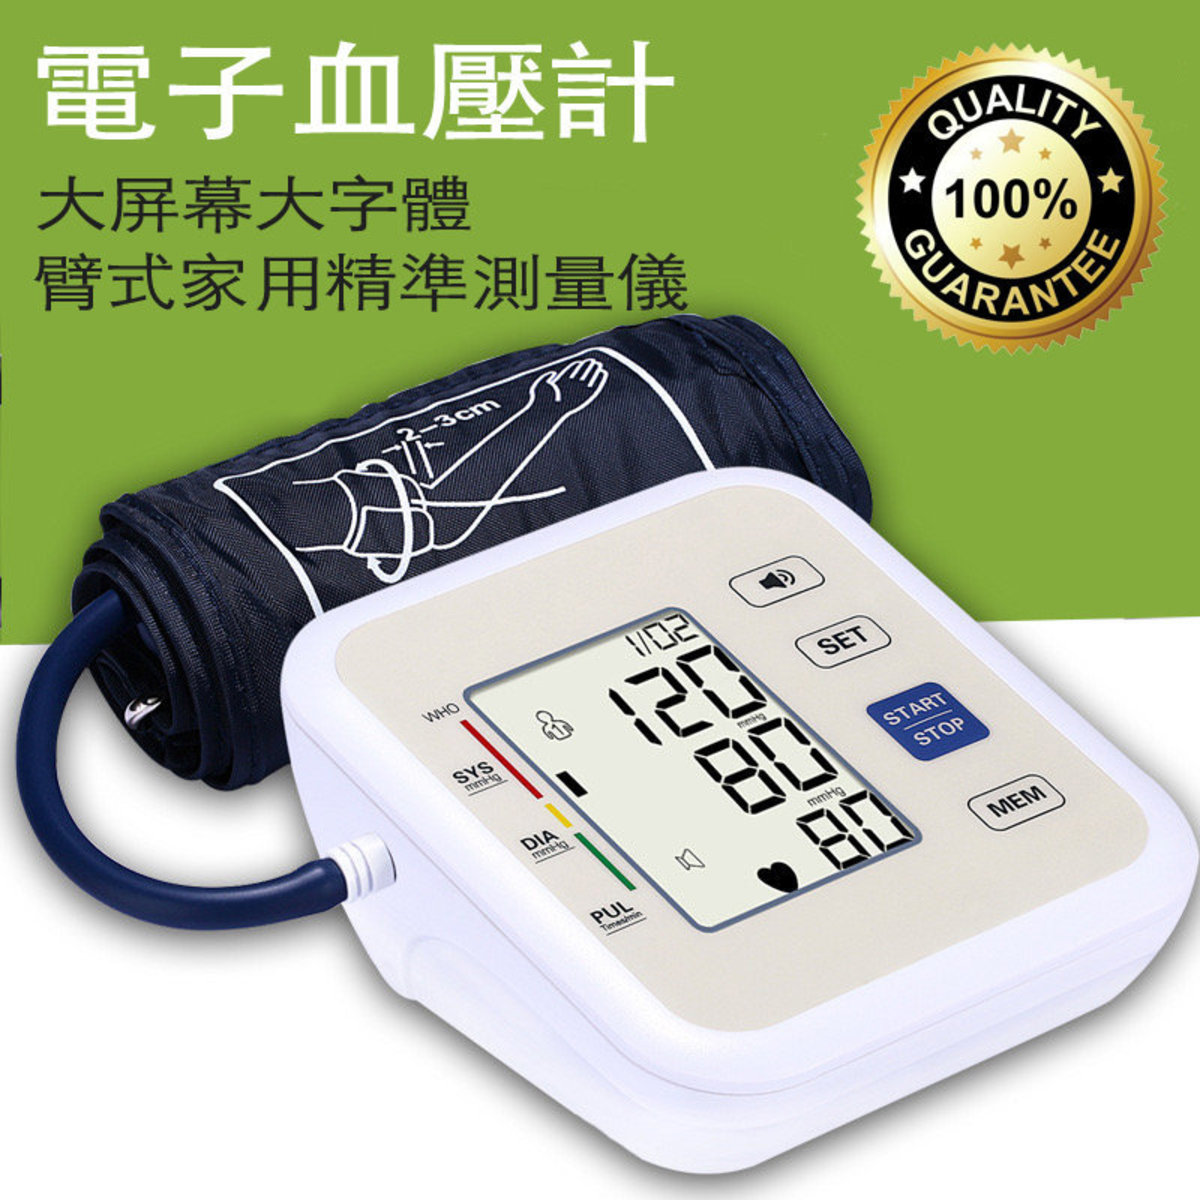 Smart electronic blood pressure monitor